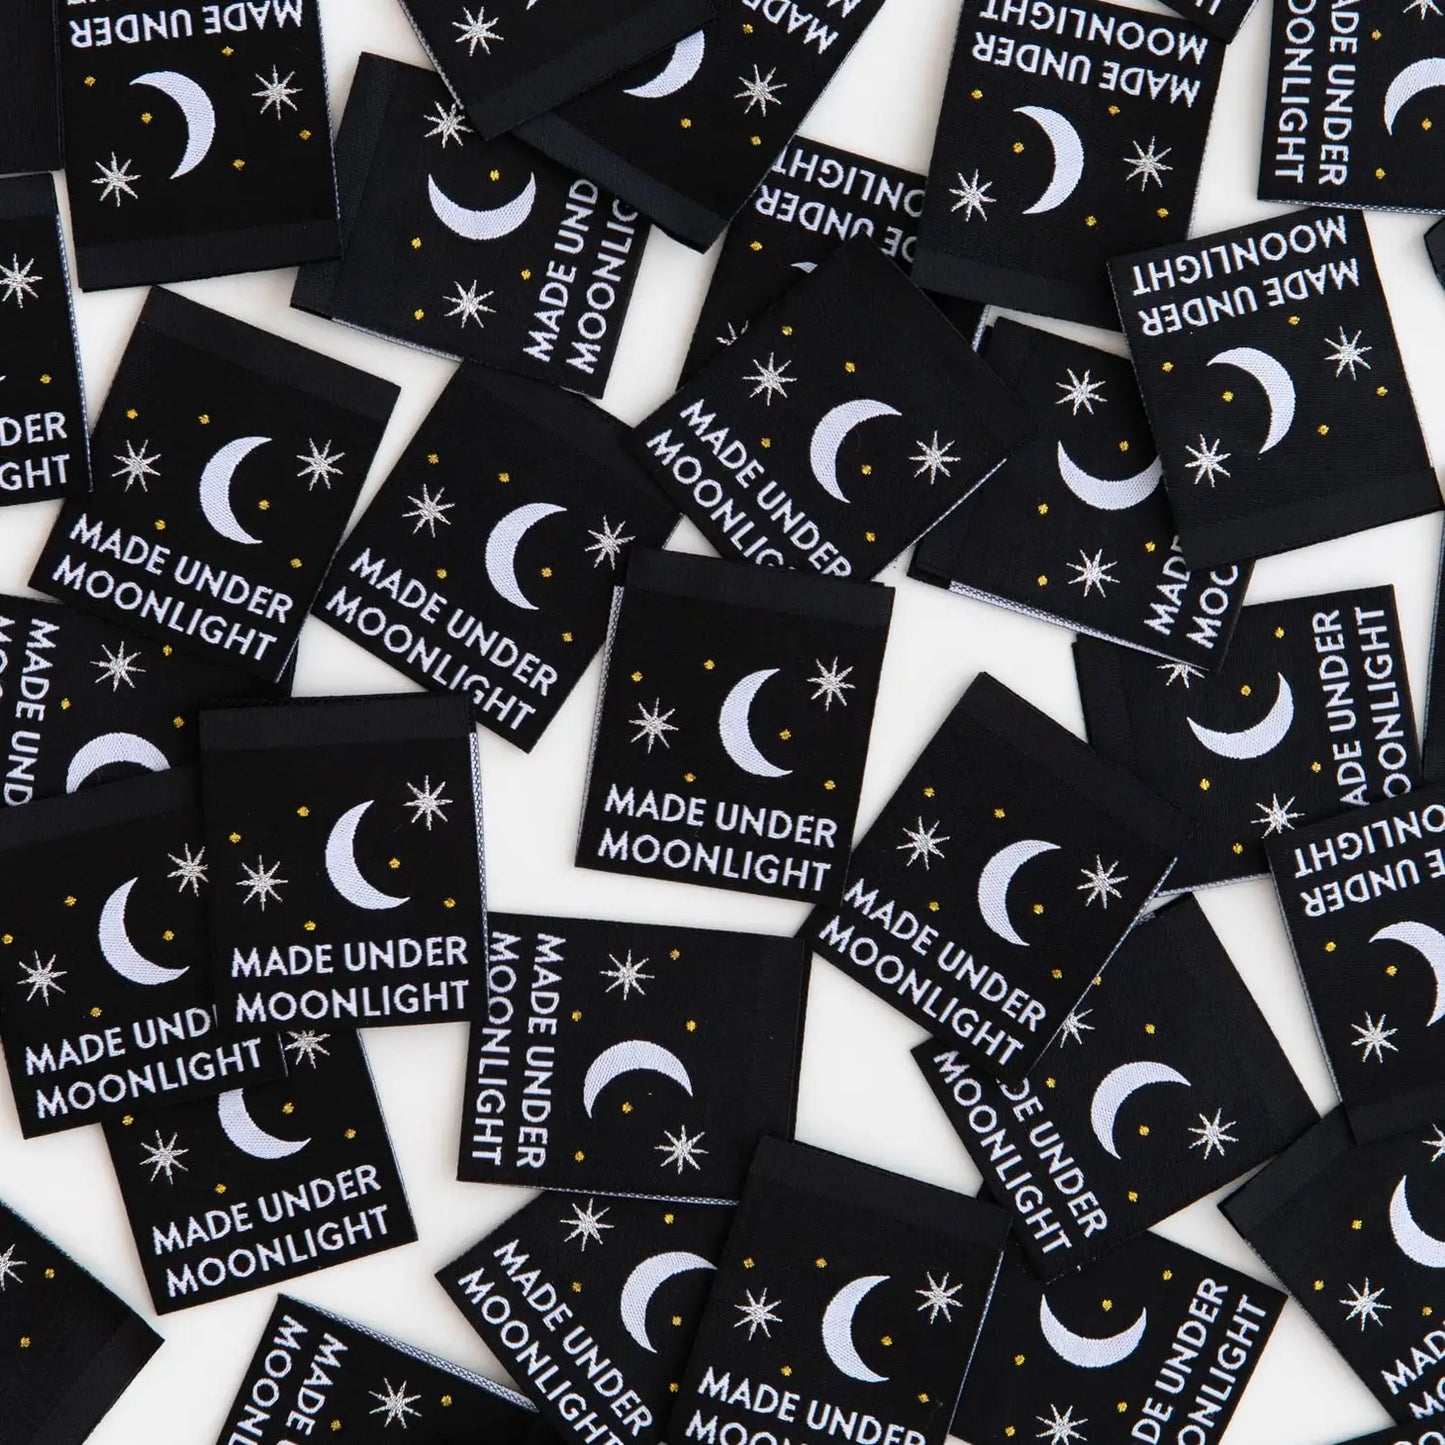 Made Under Moonlight | Woven Labels